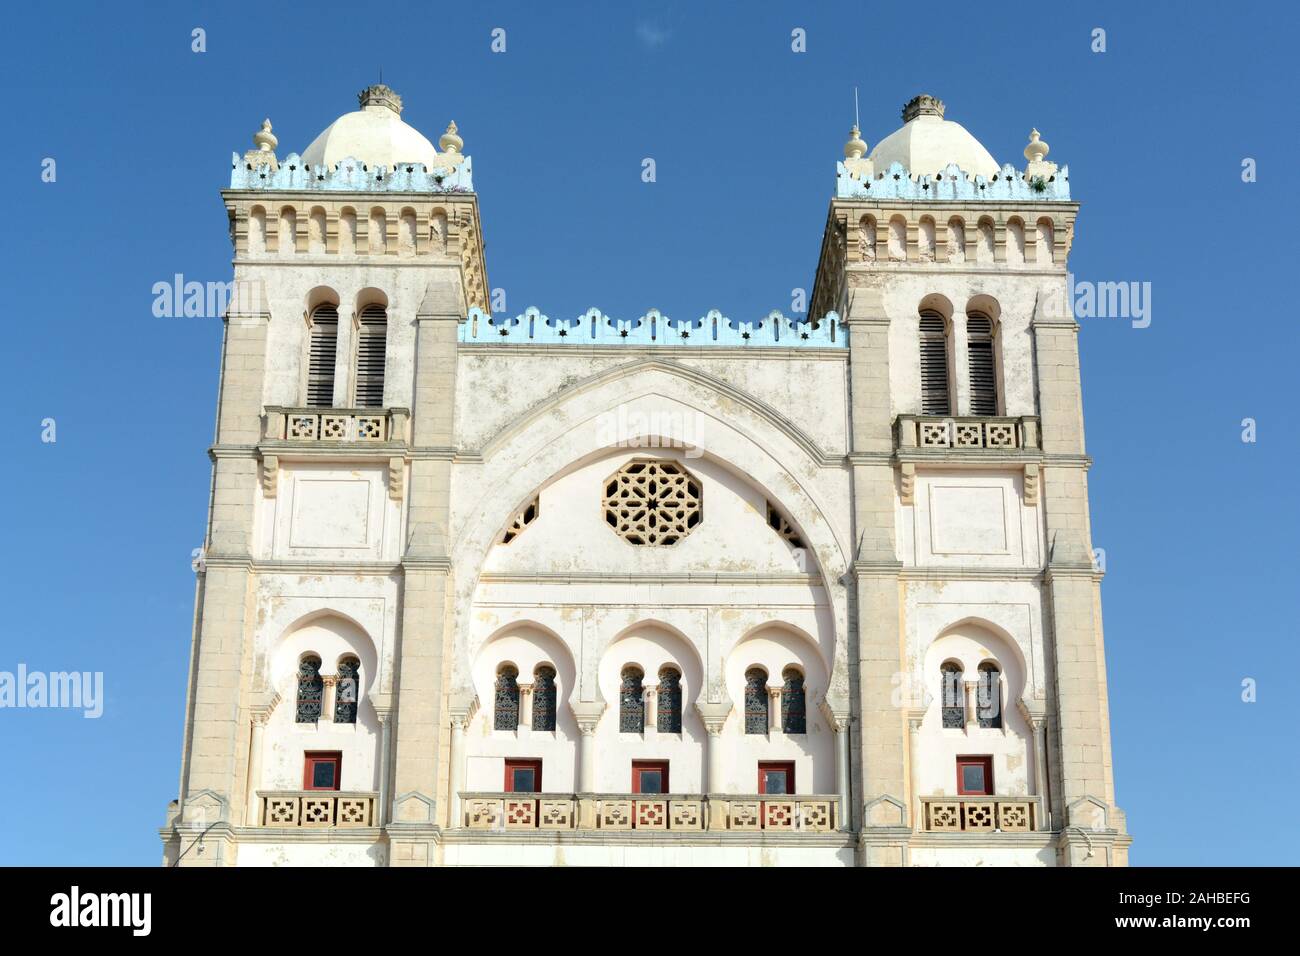 The Acropolium, or Saint Louis Cathedral, a 19th century church at Byrsa Hill in the ancient city of Carthage on outskirts of Tunis, Tunisia. Stock Photo